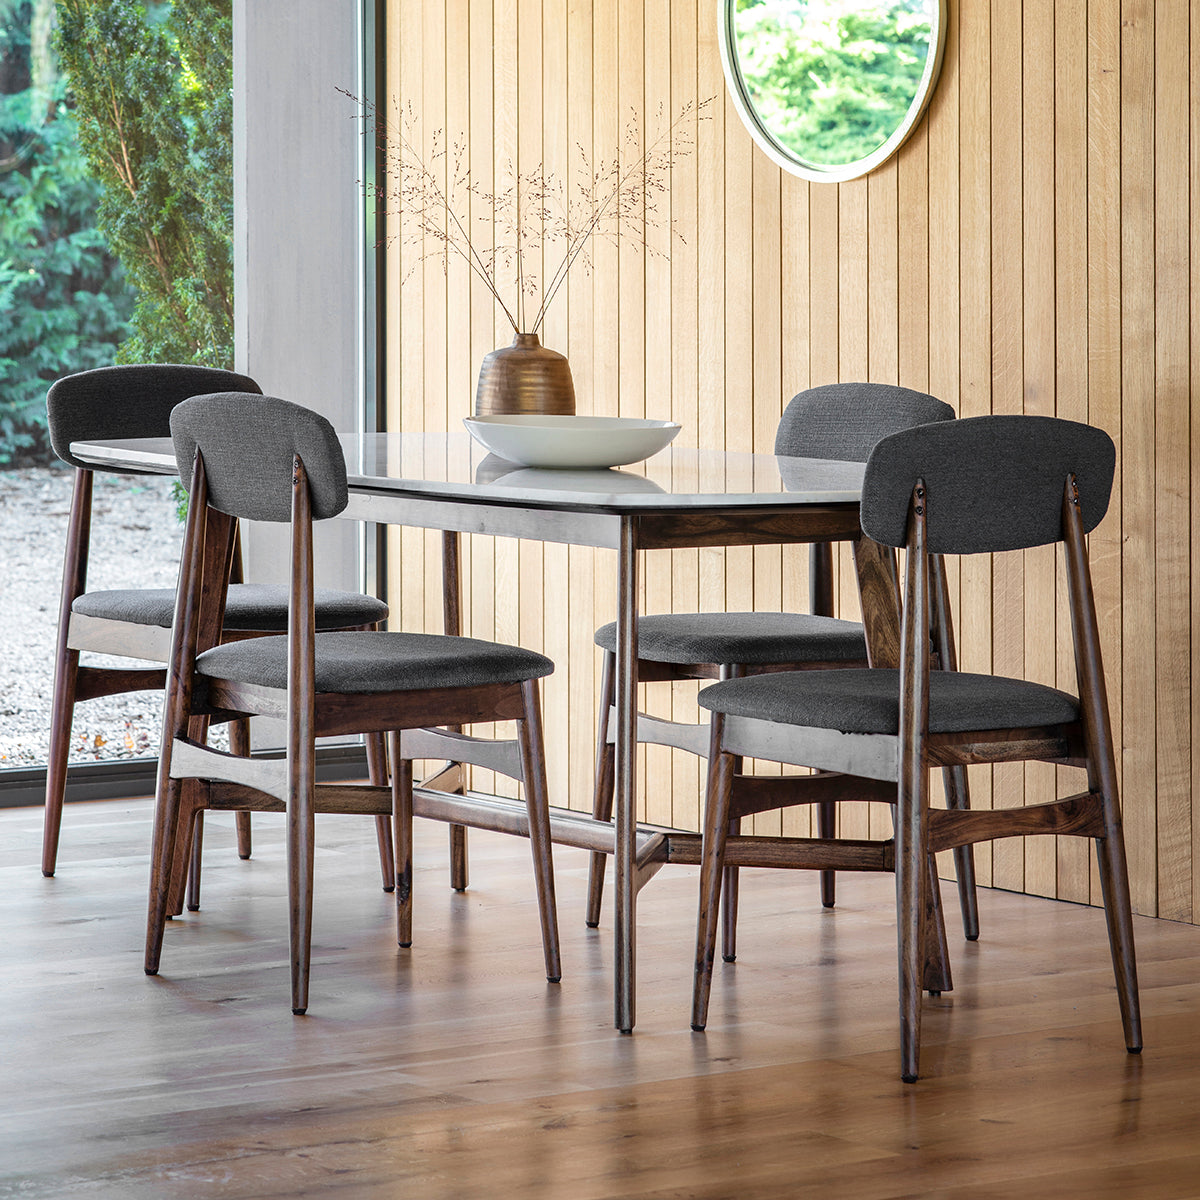 An Avonwick Dining Table 1600x900x760mm with four chairs for home furniture and interior decor enthusiasts from Kikiathome.co.uk.